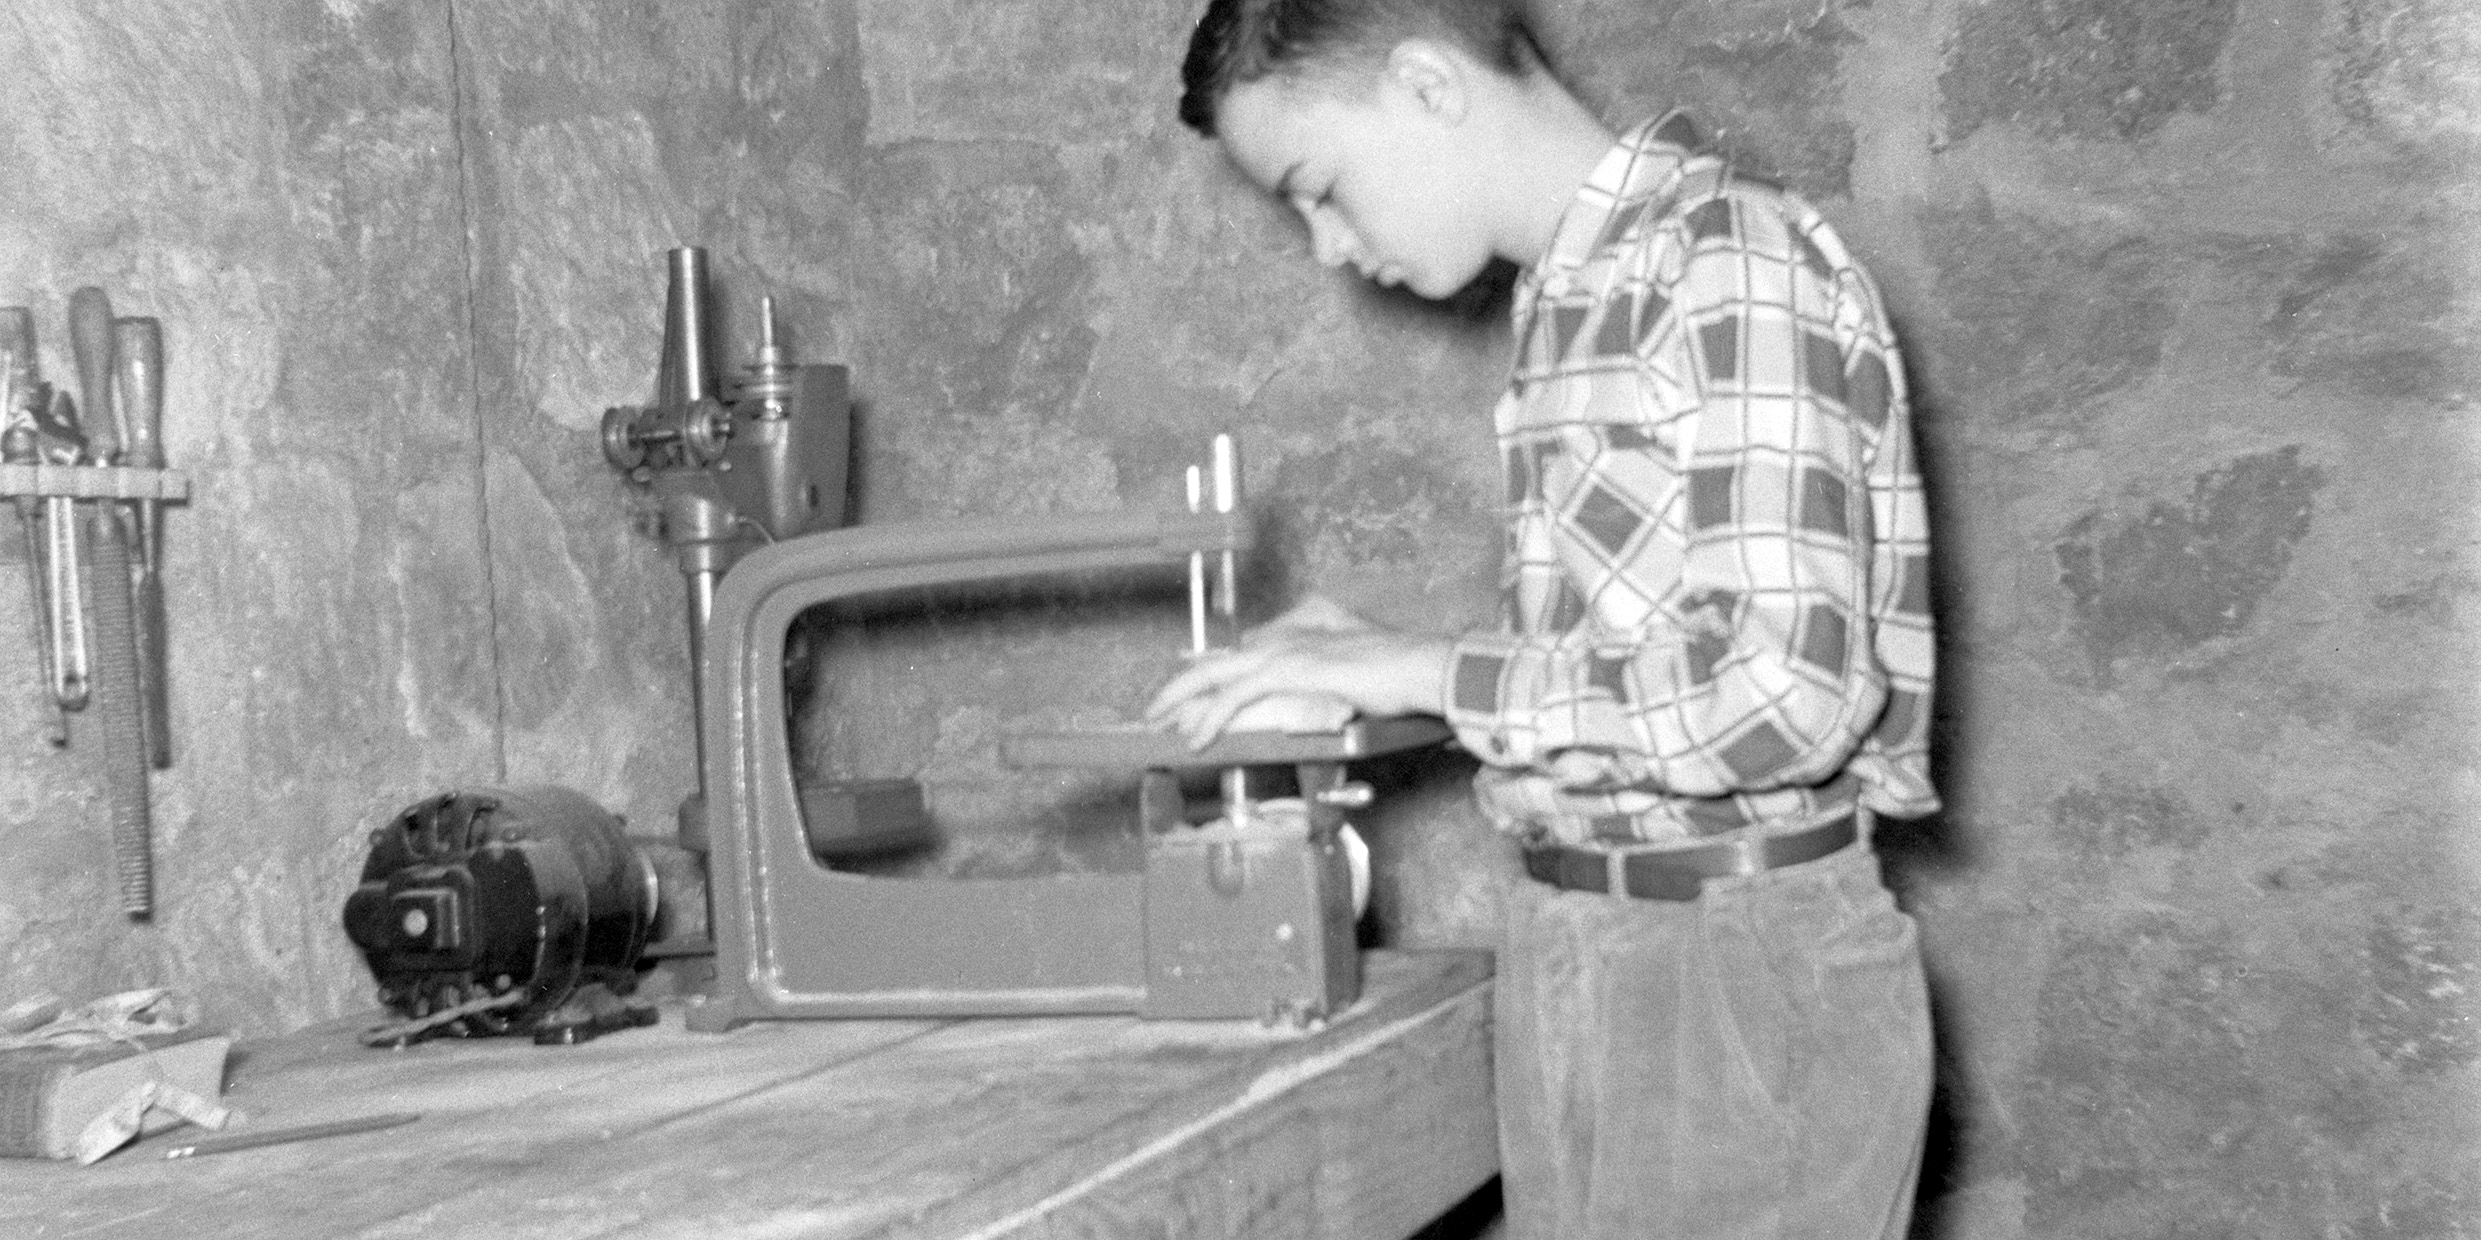 Image of a teenager cutting a board with a jigsaw on a basement workbench